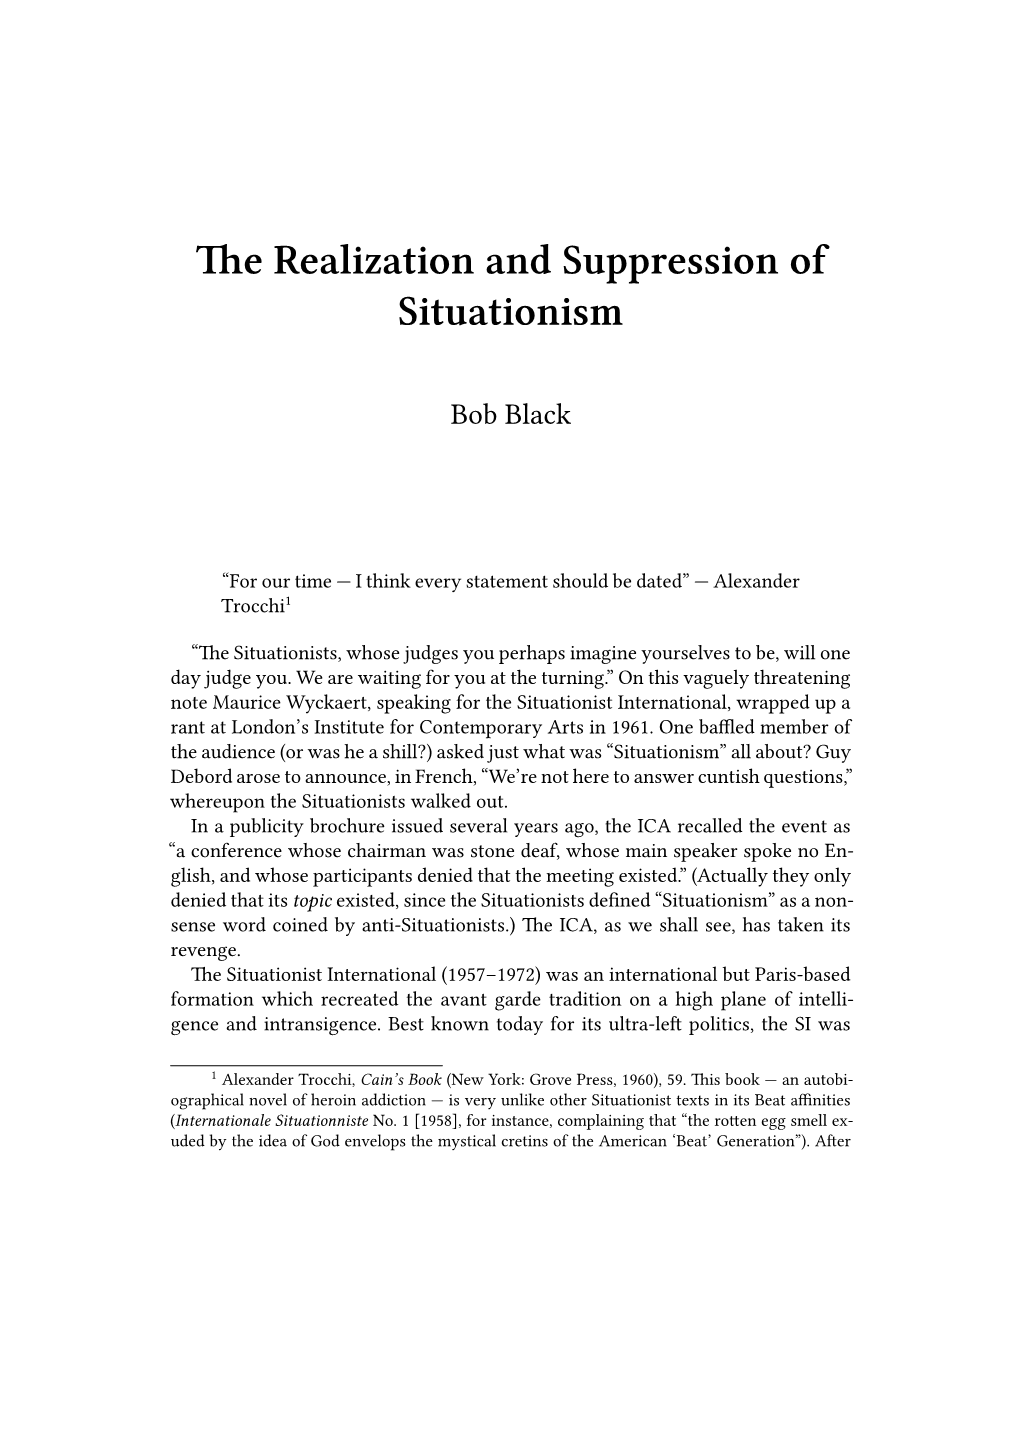 Realization and Suppression of Situationism